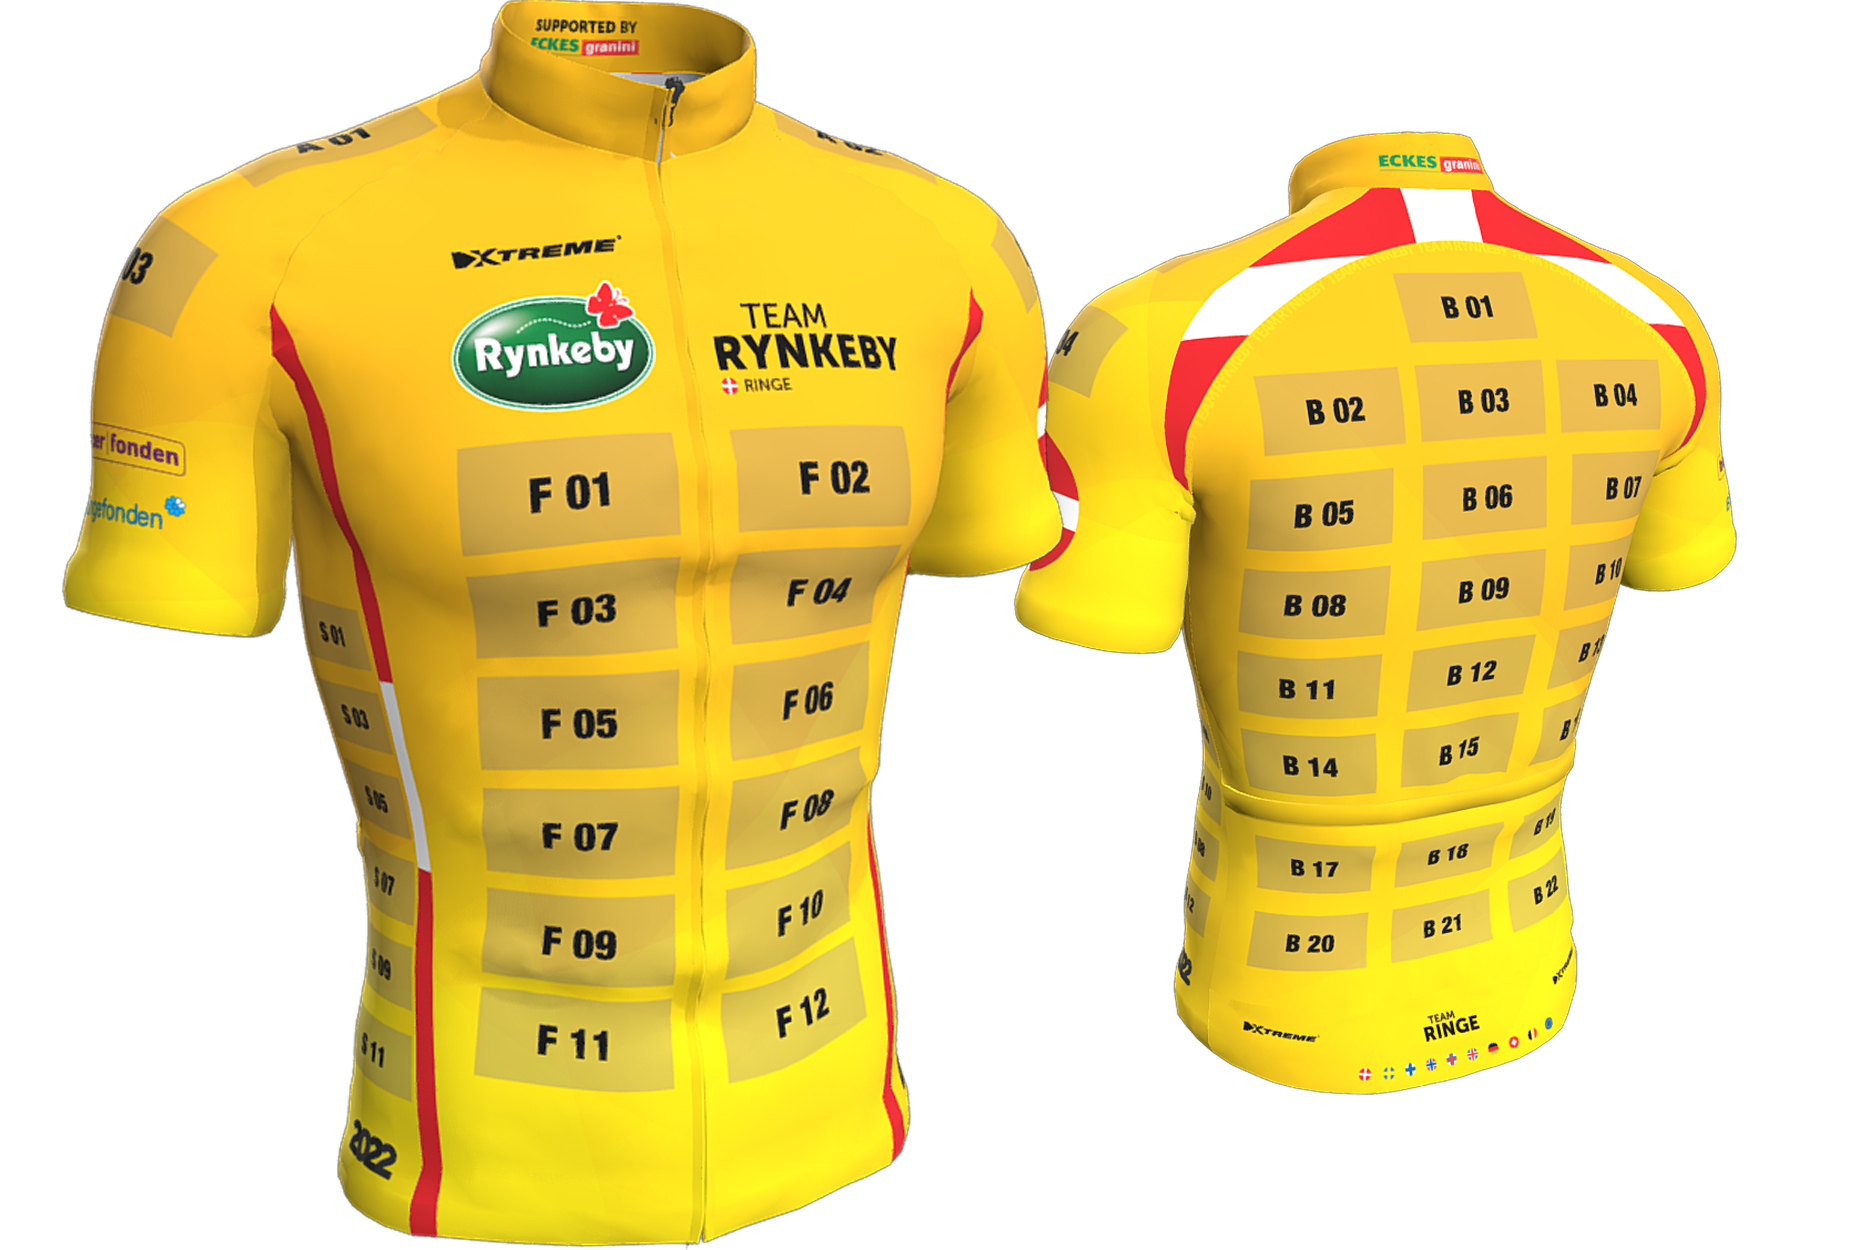 Here is the design of the Team Rynkeby clothes for the season 2021/2022